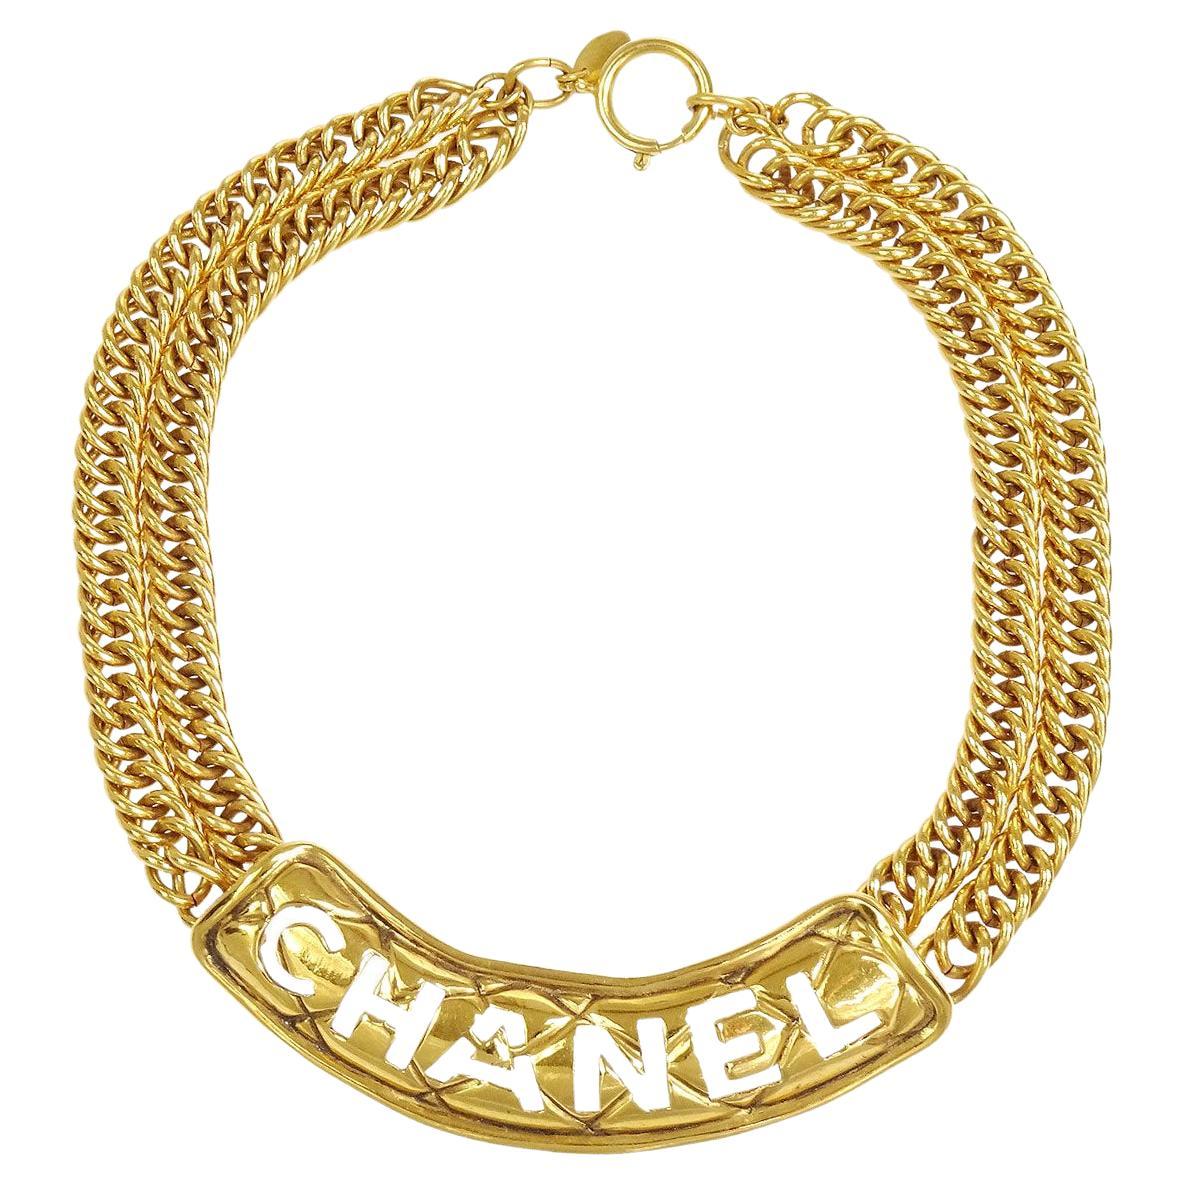 CHANEL Gold Metal 'CHANEL' Plate Logo Double Chain Link Choker Necklace